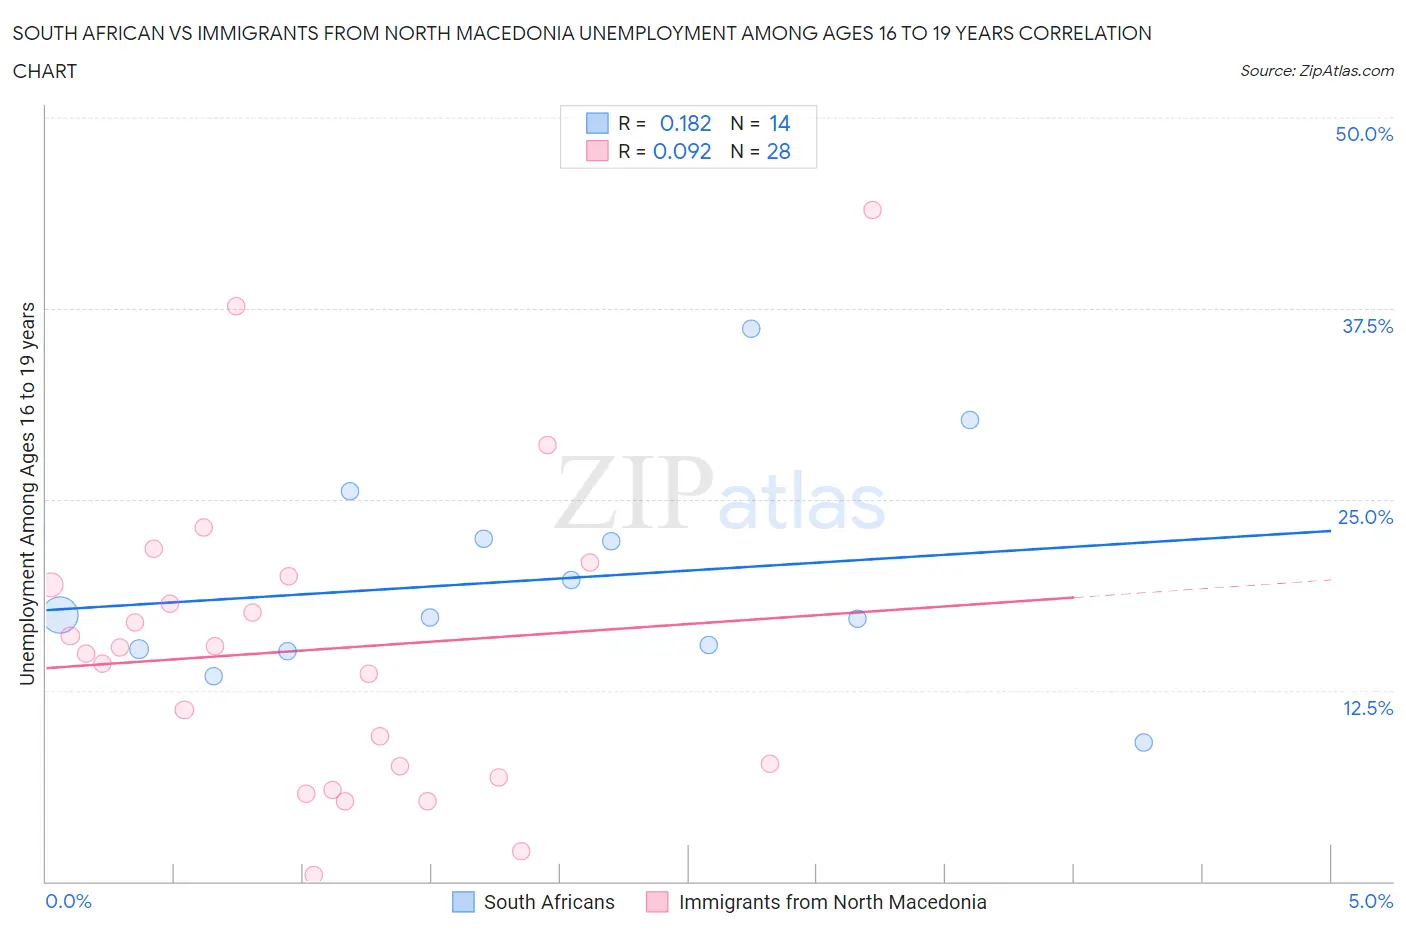 South African vs Immigrants from North Macedonia Unemployment Among Ages 16 to 19 years